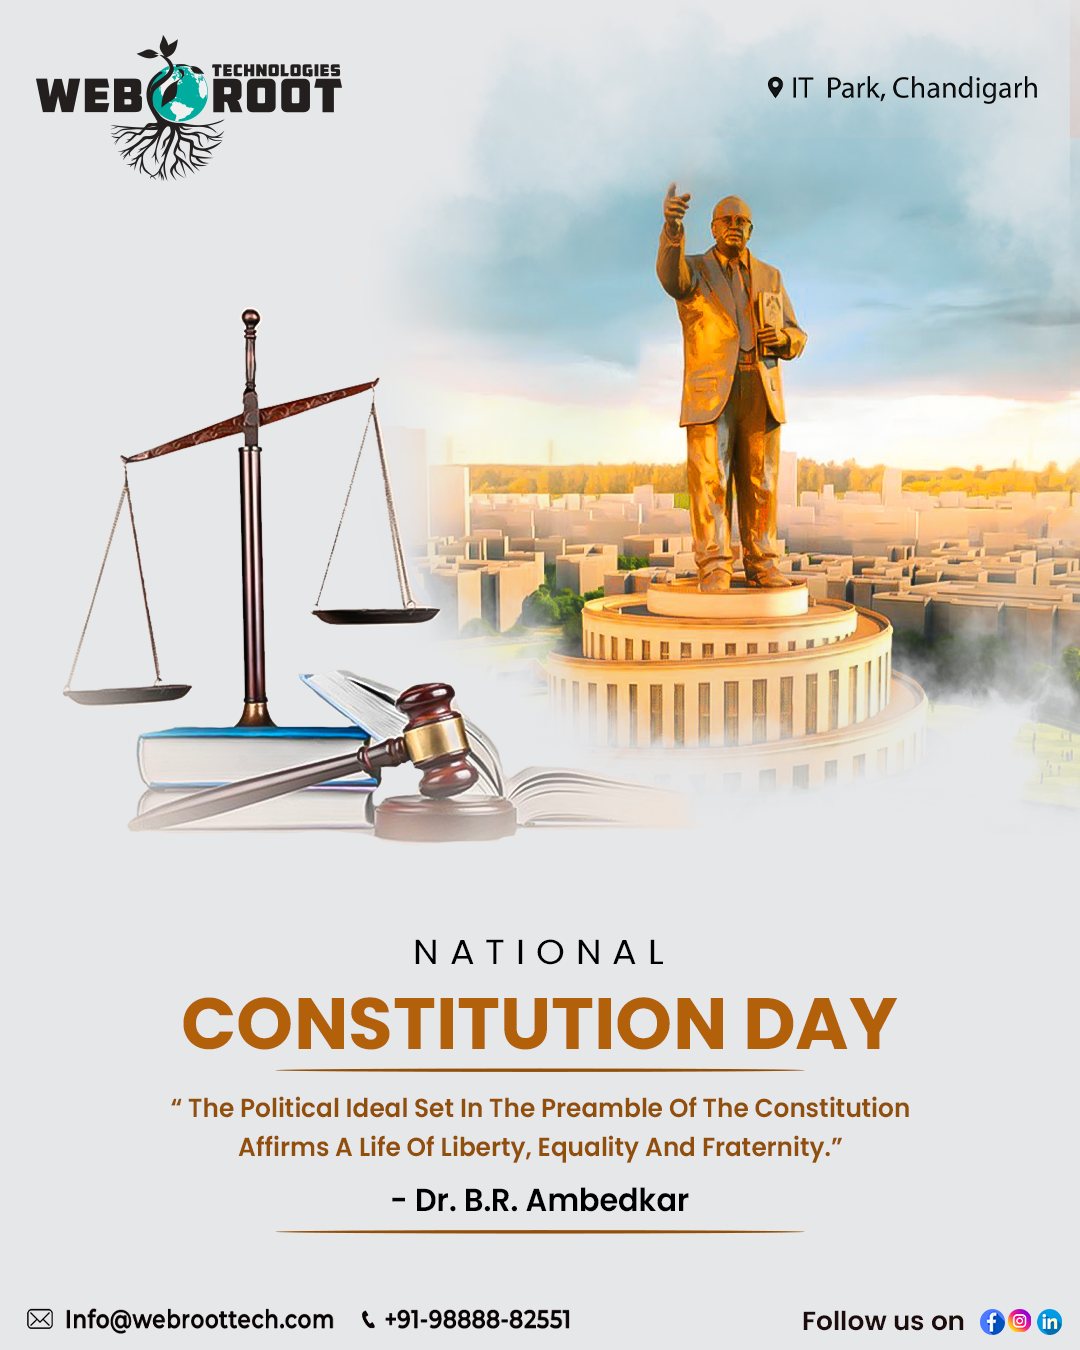 It is imperative that we talk about our rights and duties. Being aware of our rights will not only help identify violations but also make us respect the fundamental rights of others. 

On this Constitution Day, let us pledge to respect and uphold the Constitution. Webroot Technologies wishes everyone a happy Indian Constitution Day.

#Constitution #ConstitutionDay #ConstitutionDay2022 #ConstitutionofIndia #indianconstitution #BRAmbedkar #Republic #IndianRepublic #ConstitutionDayofIndia #Preamble #PreambleofIndianConstitution
#webroottechnologies #branding #digitalcompany #creative #designer #business #success #brandidentity #brandidentitydesign